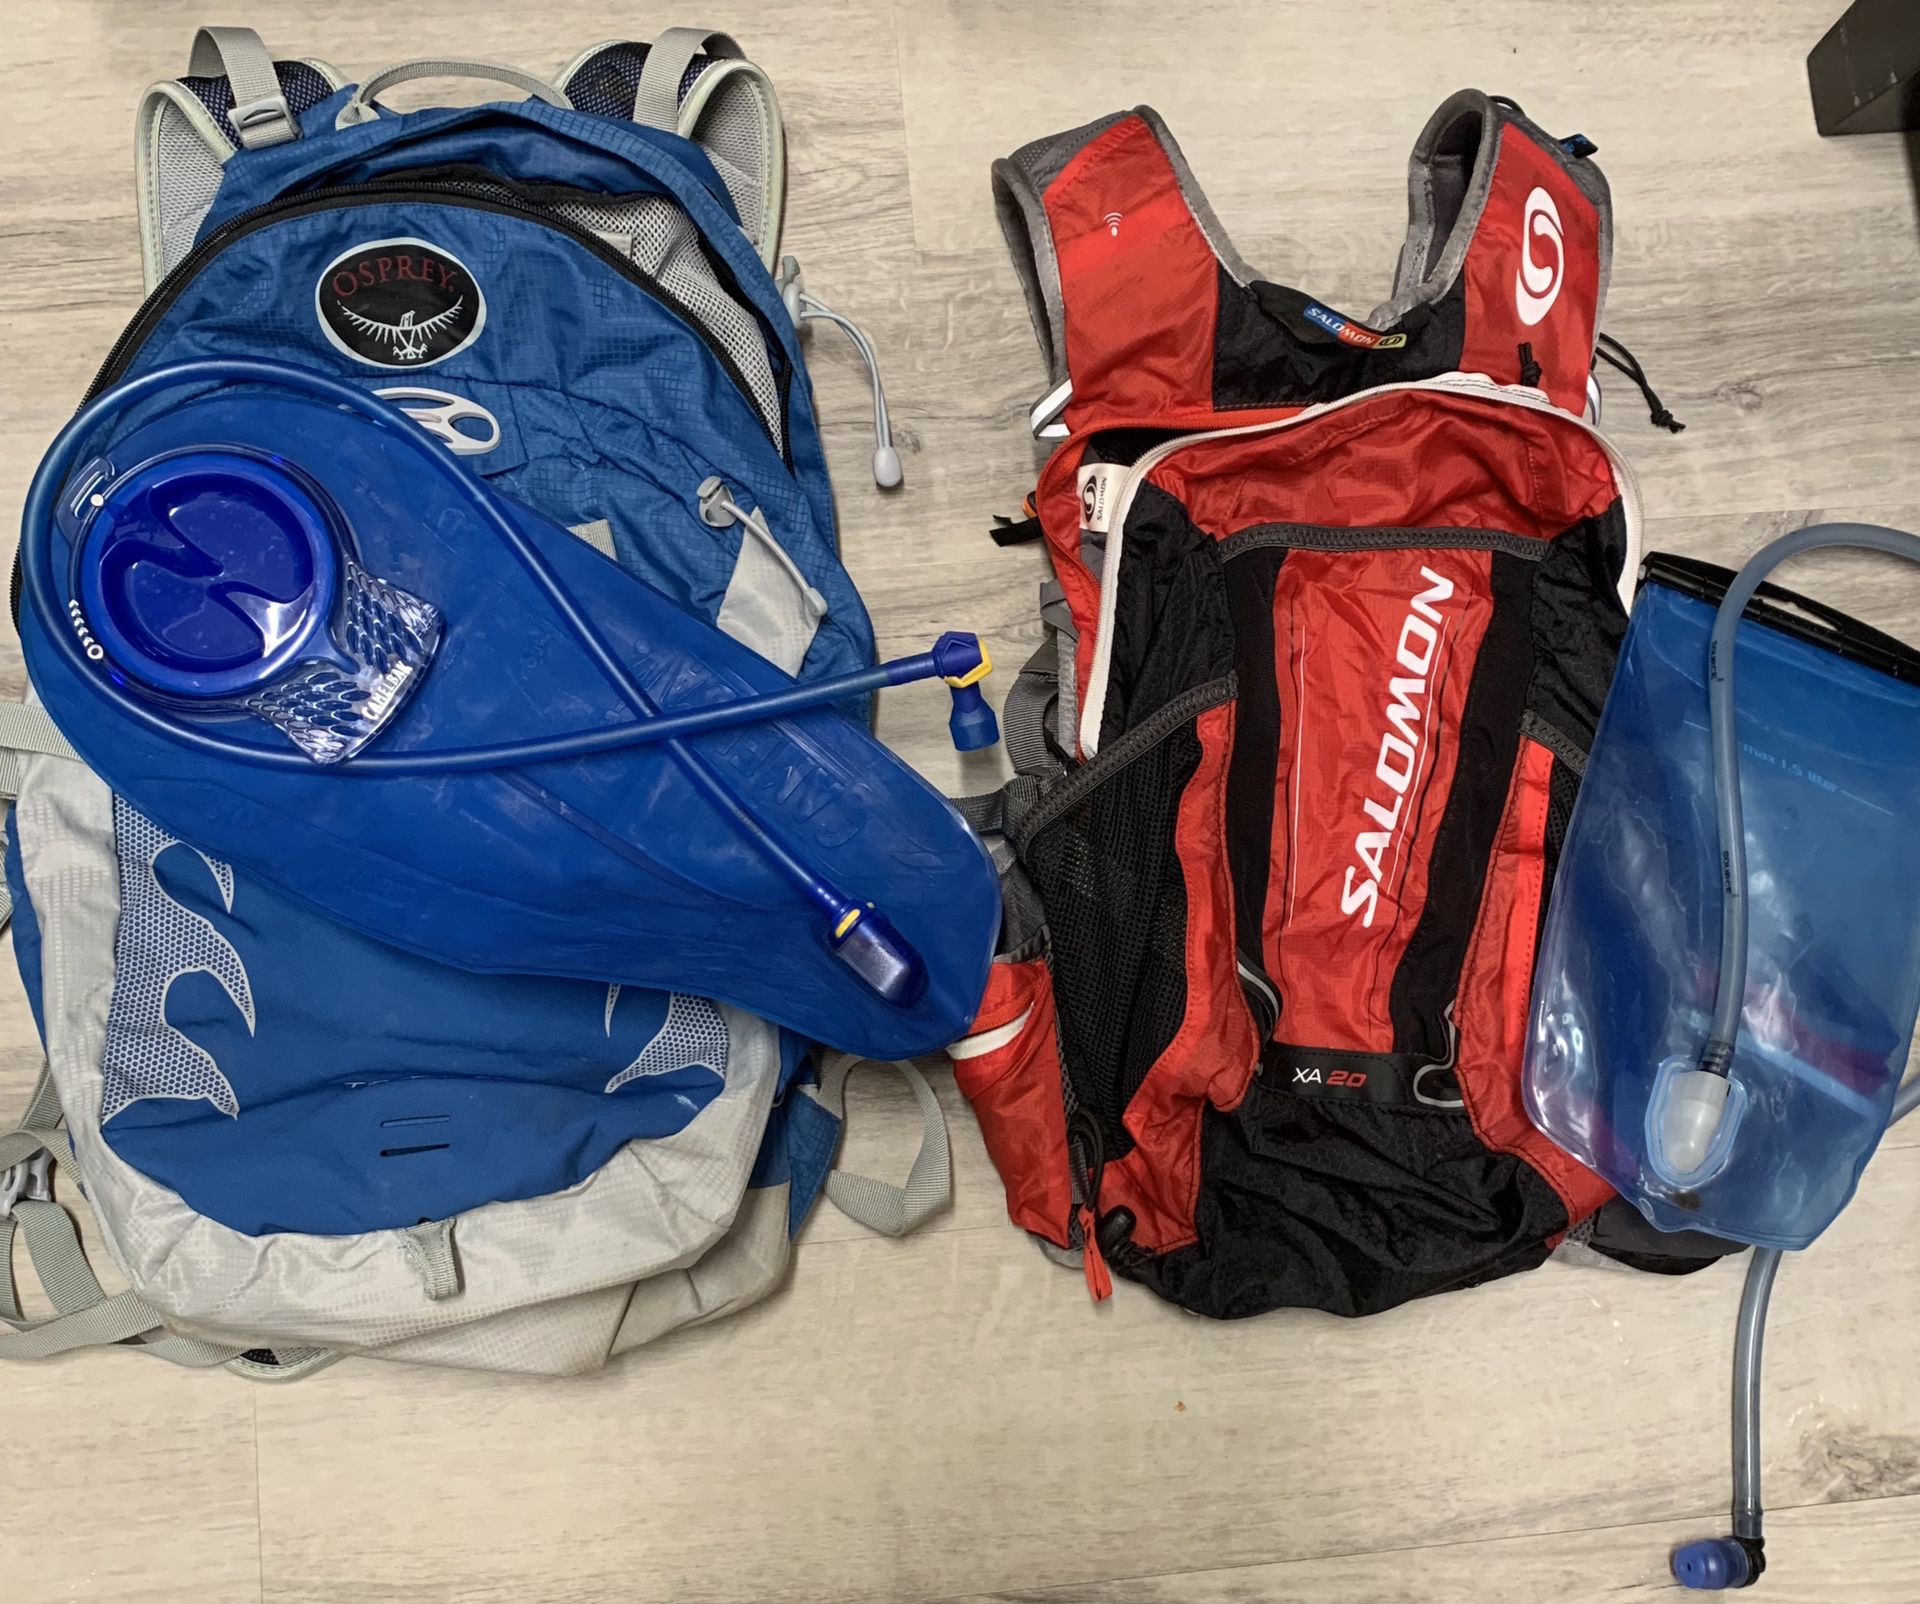 Hiking Backpacks (2 of them together) with hydration bladders